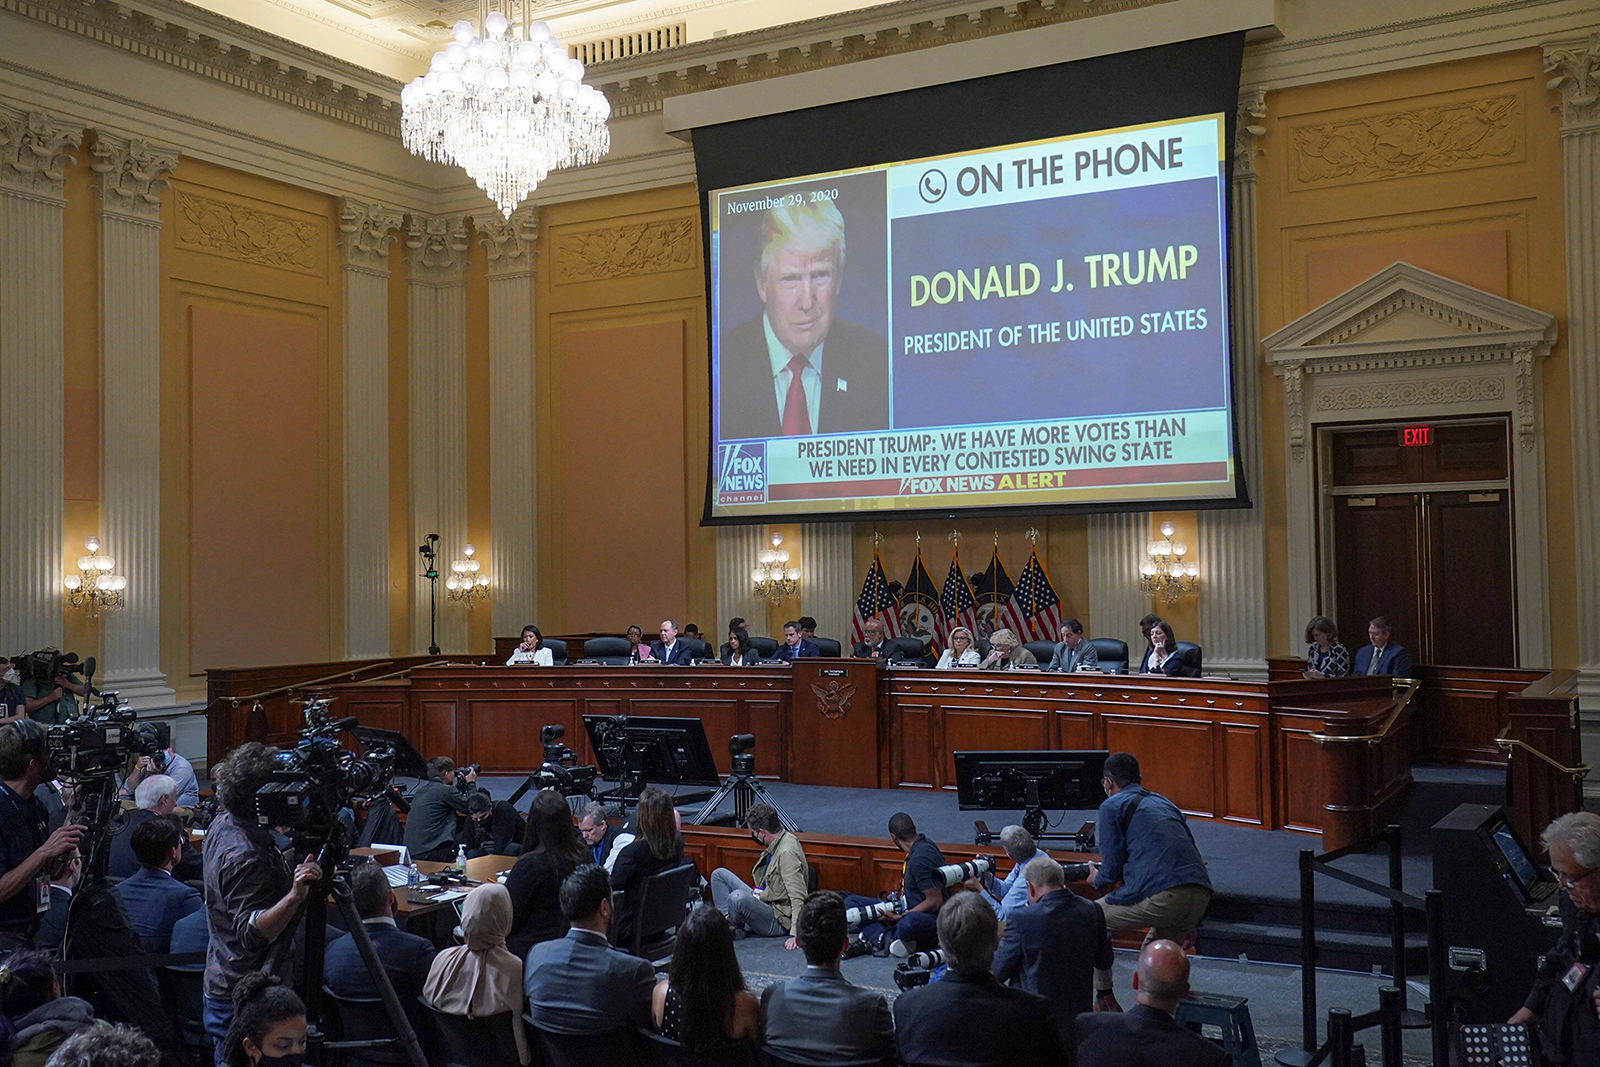 An image of former President Donald Trump phoning into a Fox News interview is shown on a screen during Thursday's U.S. House Select Committee hearing in Washington, D.C.